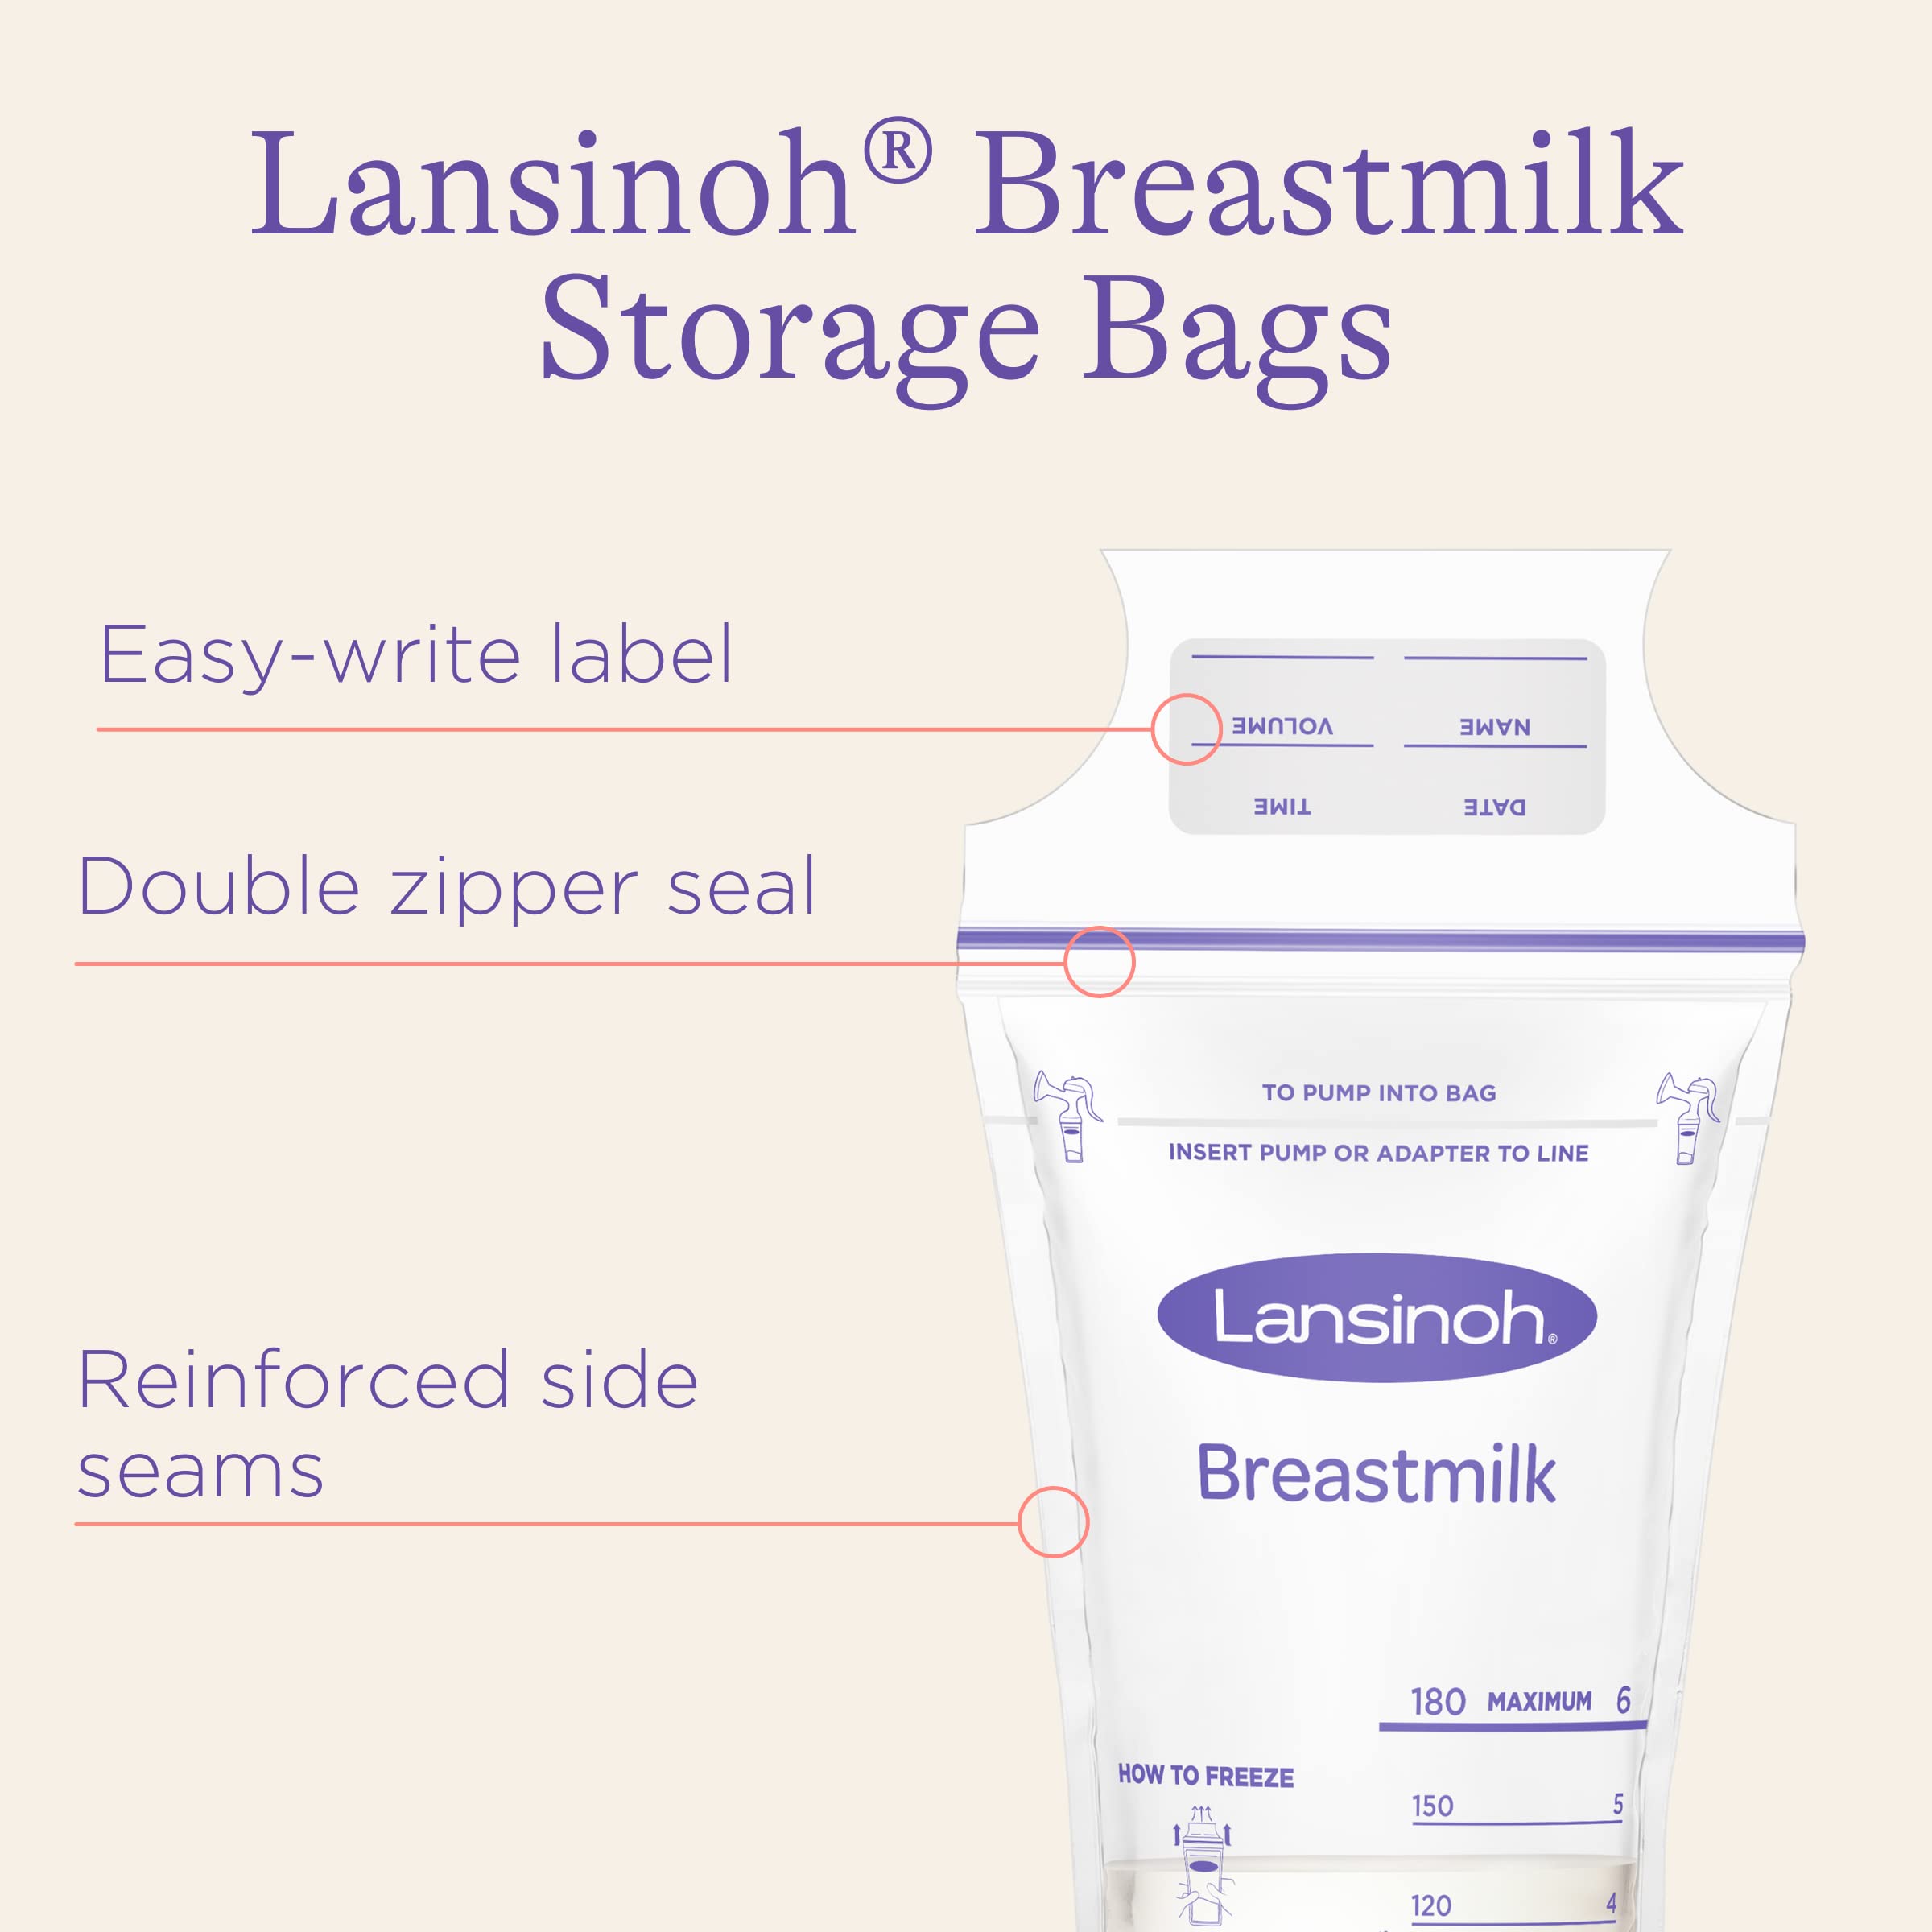 Lansinoh Breastmilk Storage Bags, 50 Count, 6 Ounce, Easy to Use Milk Storage Bags for Breastfeeding, Presterilized, Hygienically Doubled-Sealed, for Refrigeration and Freezing